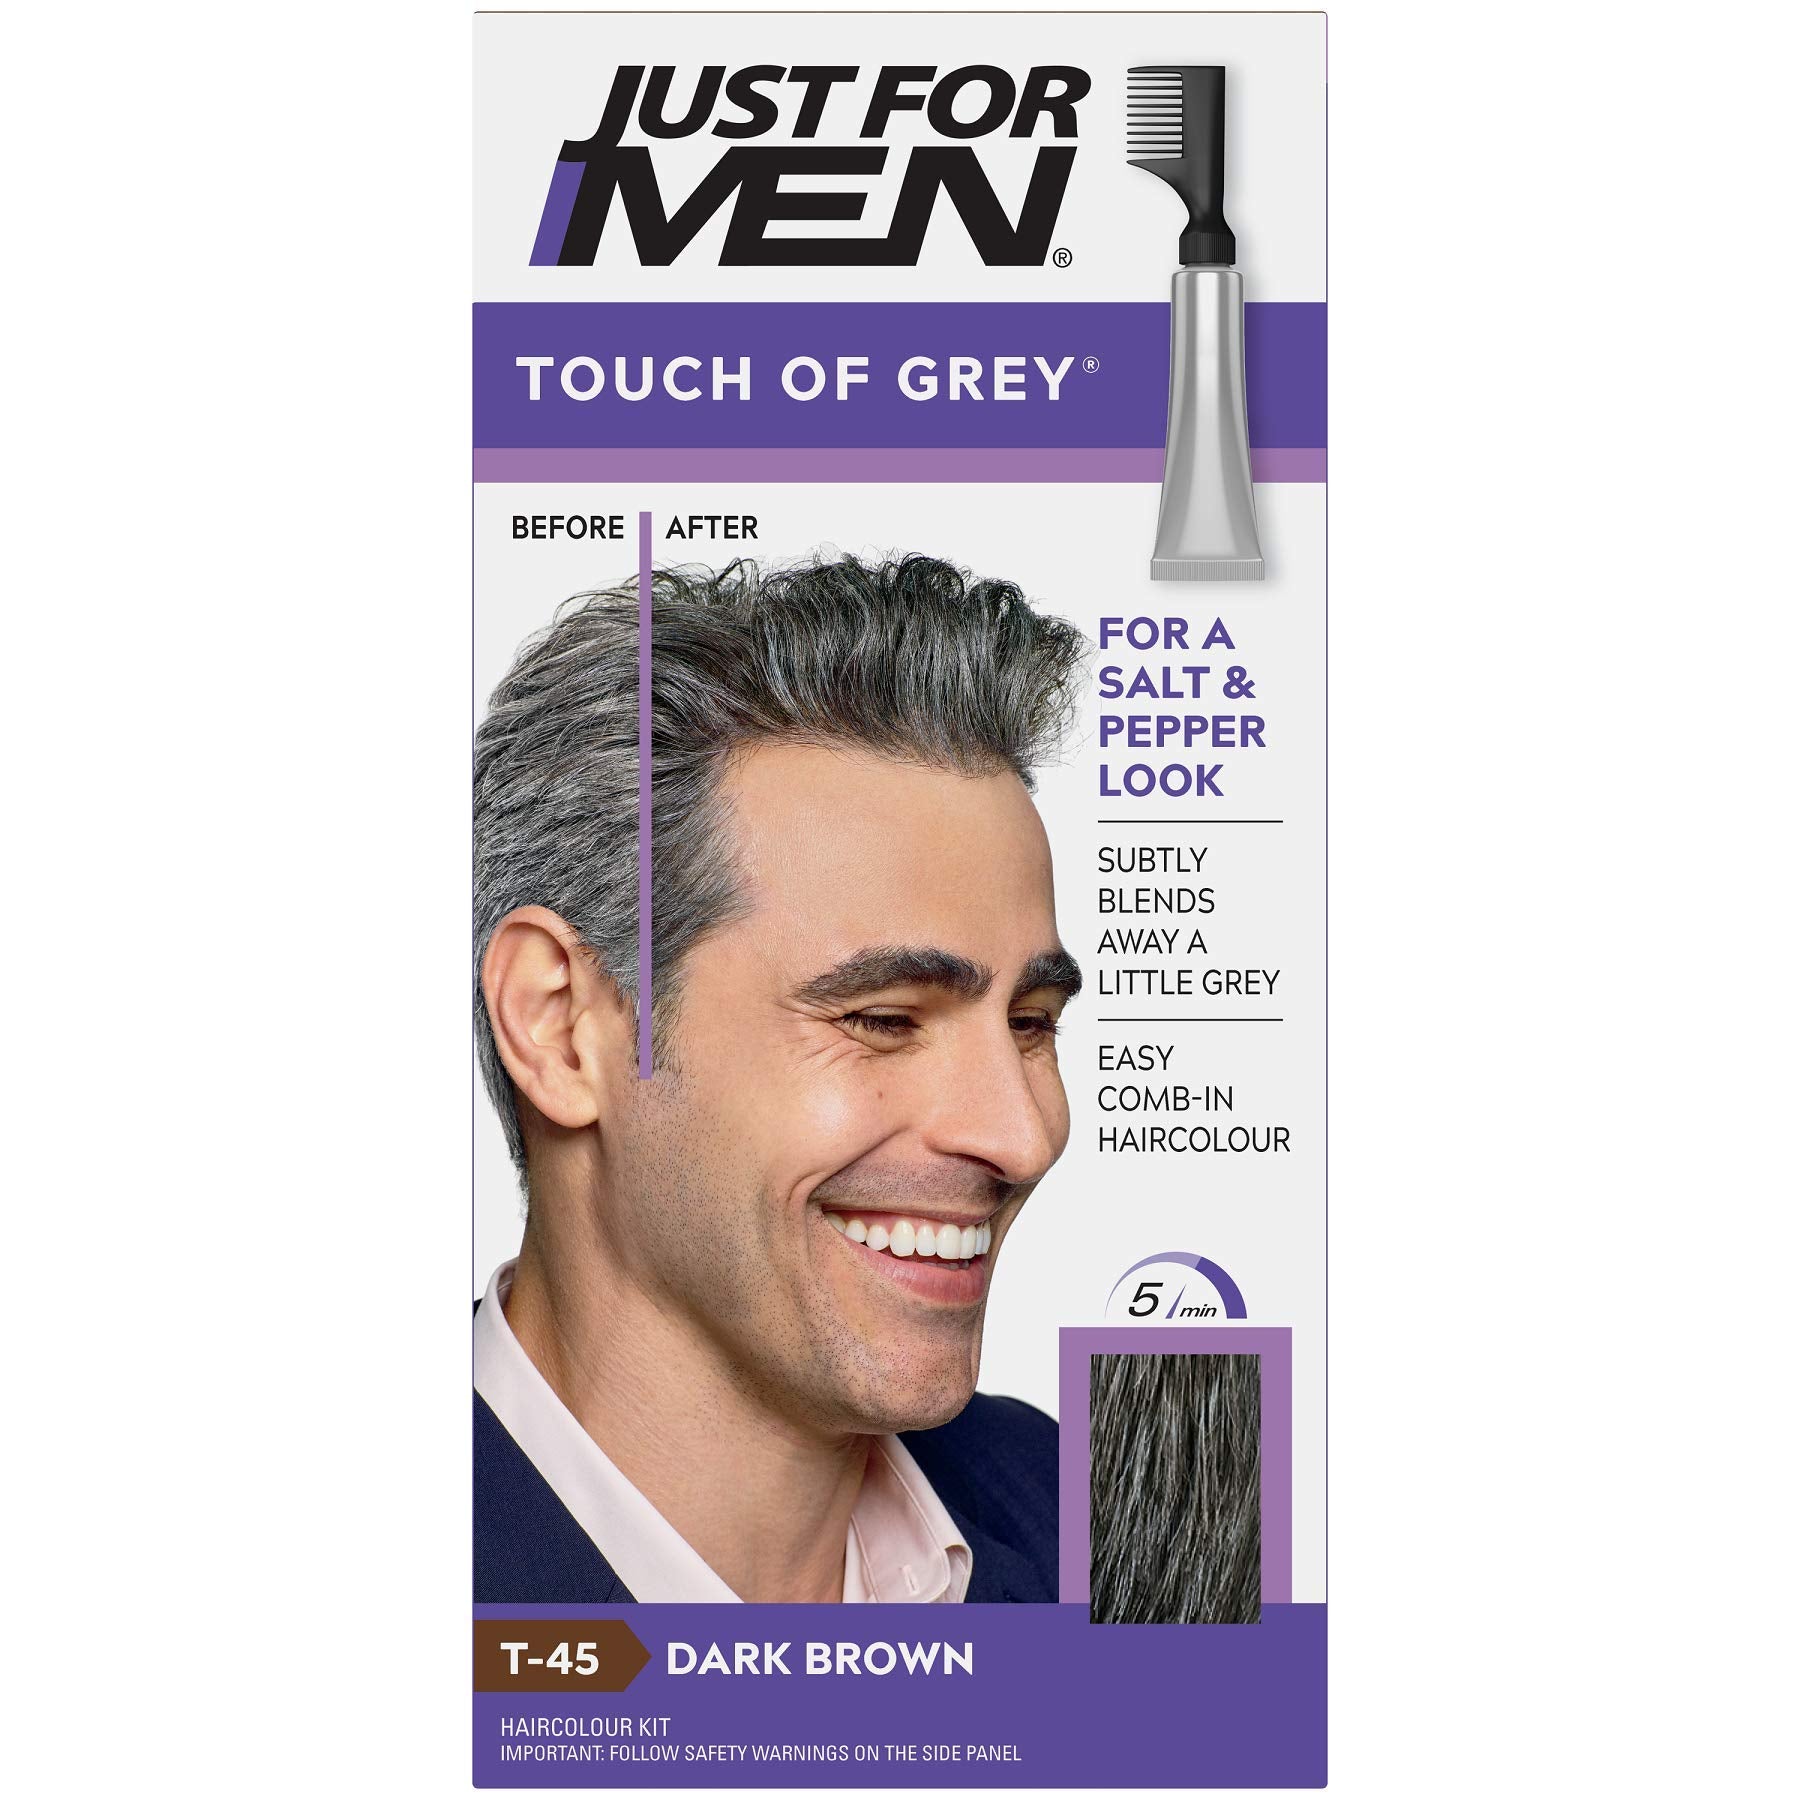 Just For Men Touch of Grey Dark Brown Hair Dye For a Natural Salt & Pepper Look, T45